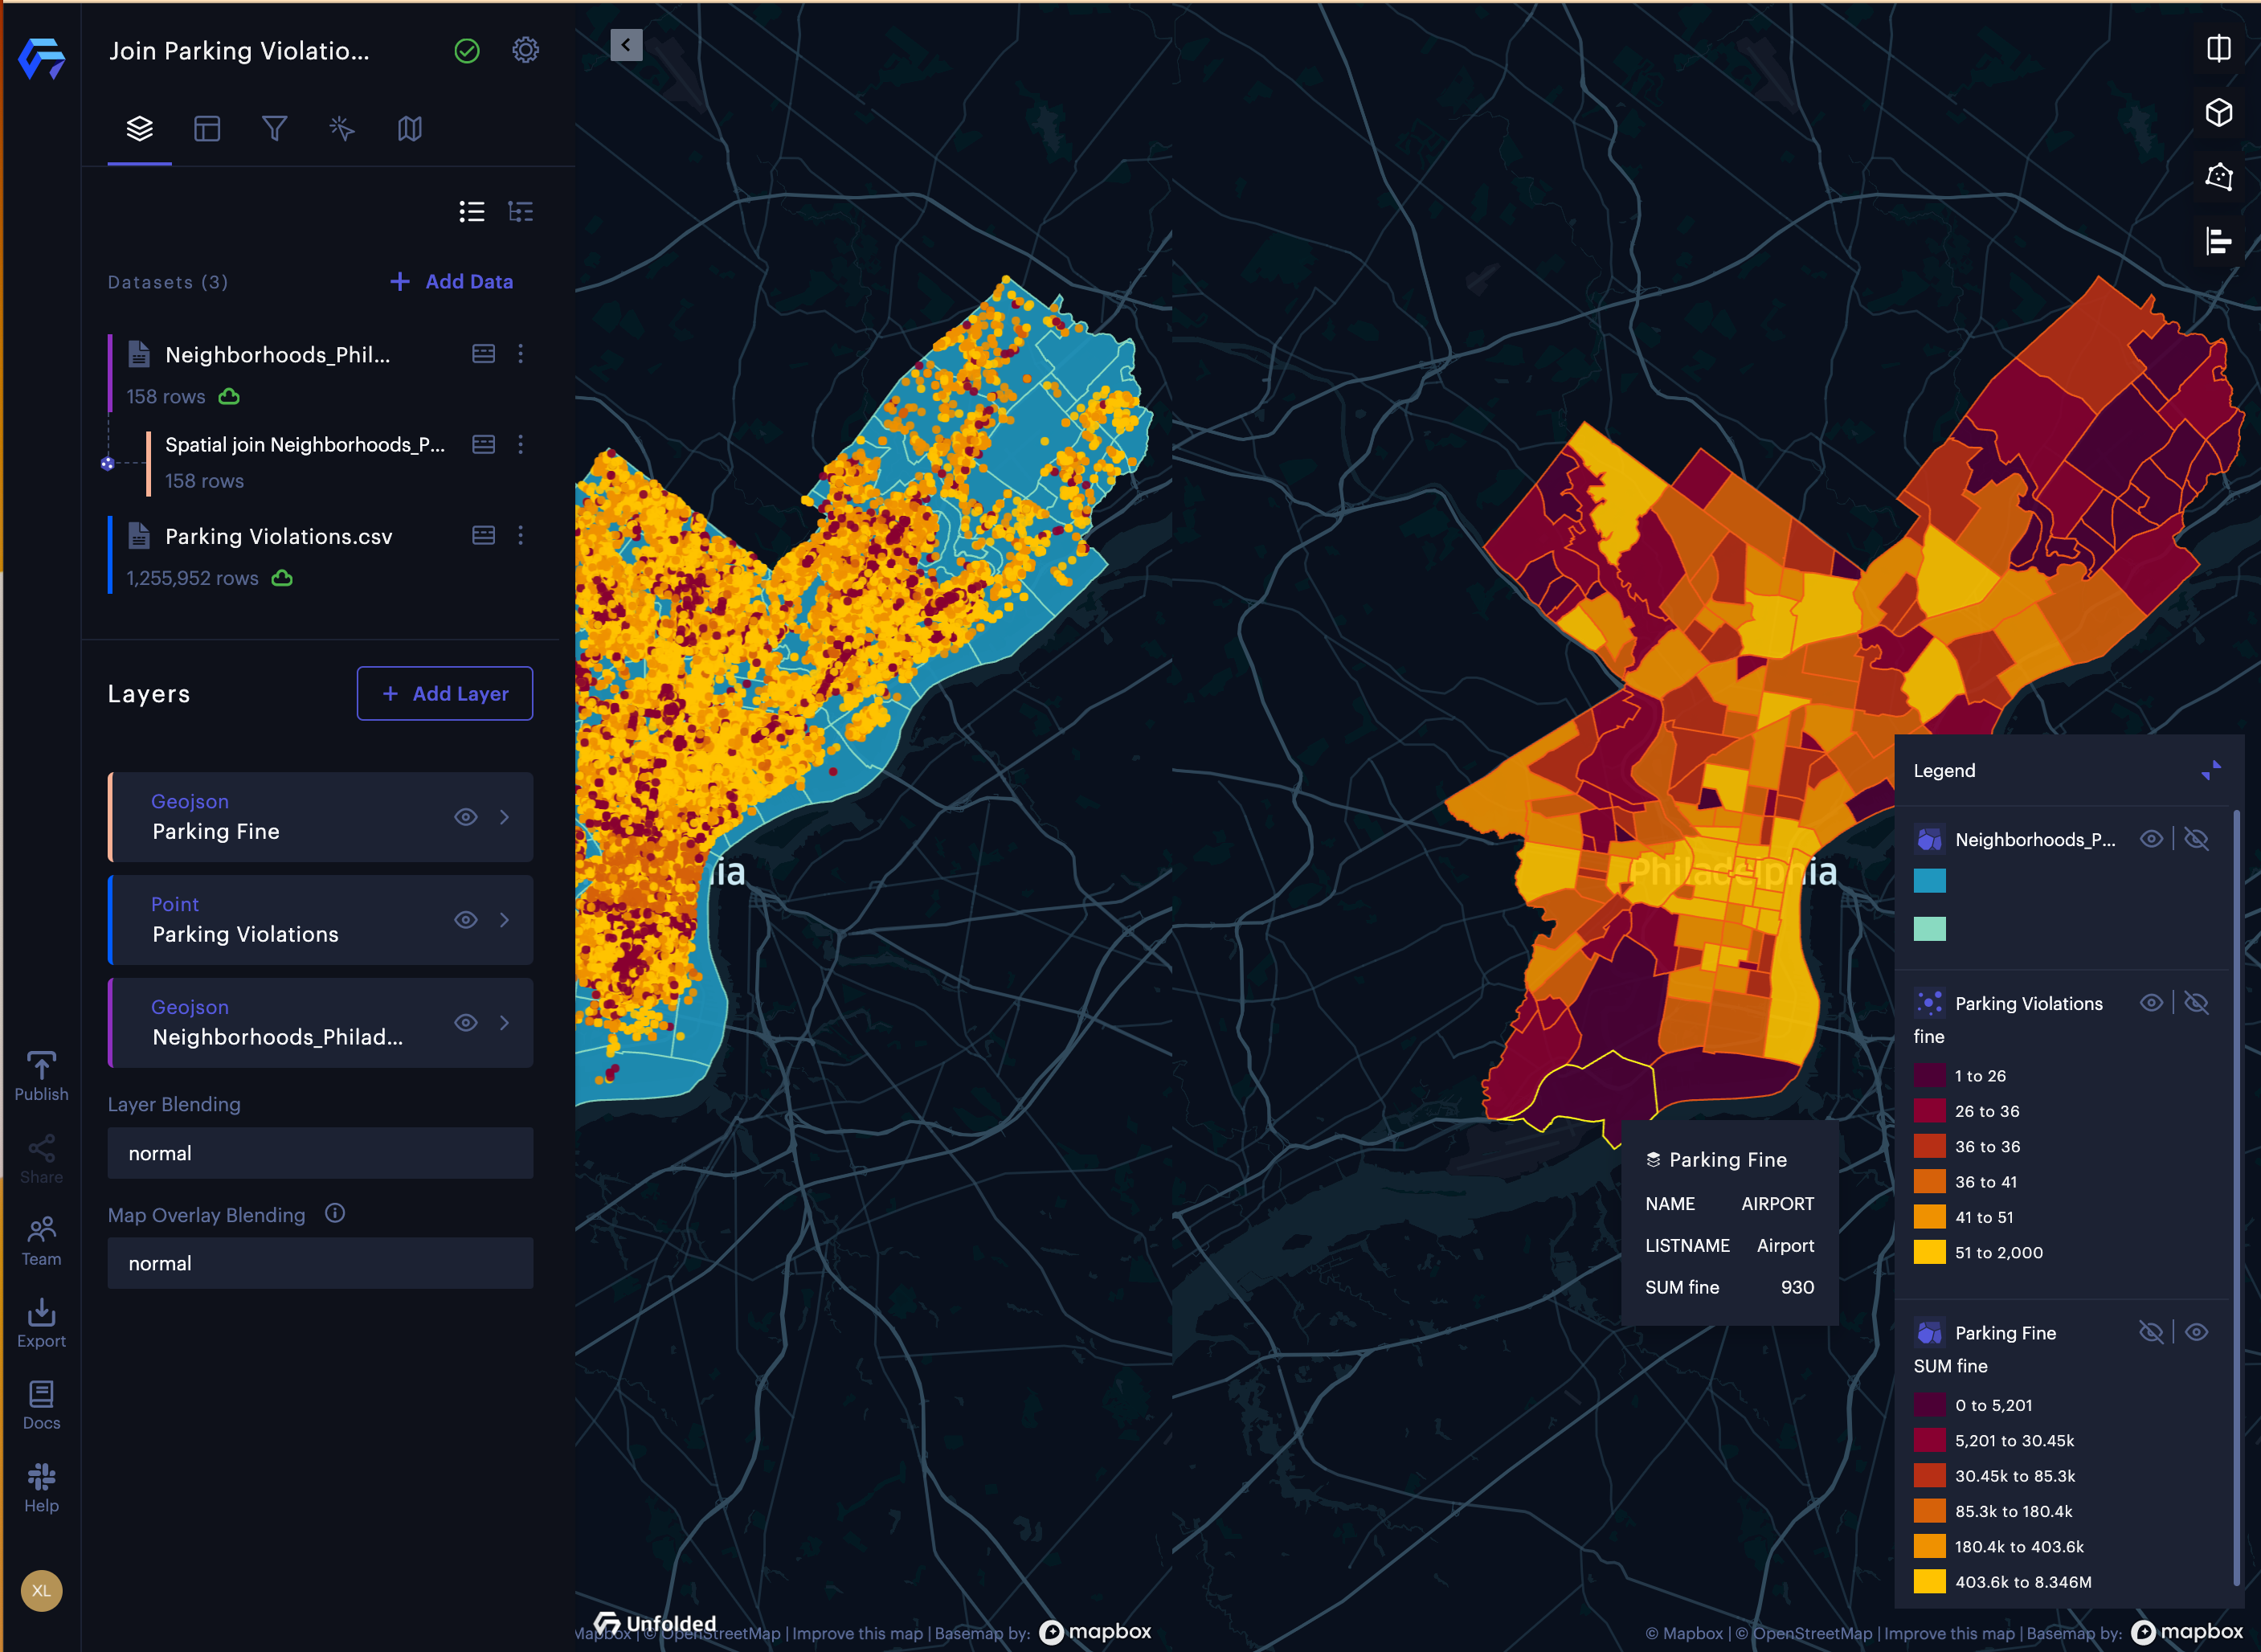 

The result of spatial join the parking infractions data with 157 neighborhoods in Philadelphia.